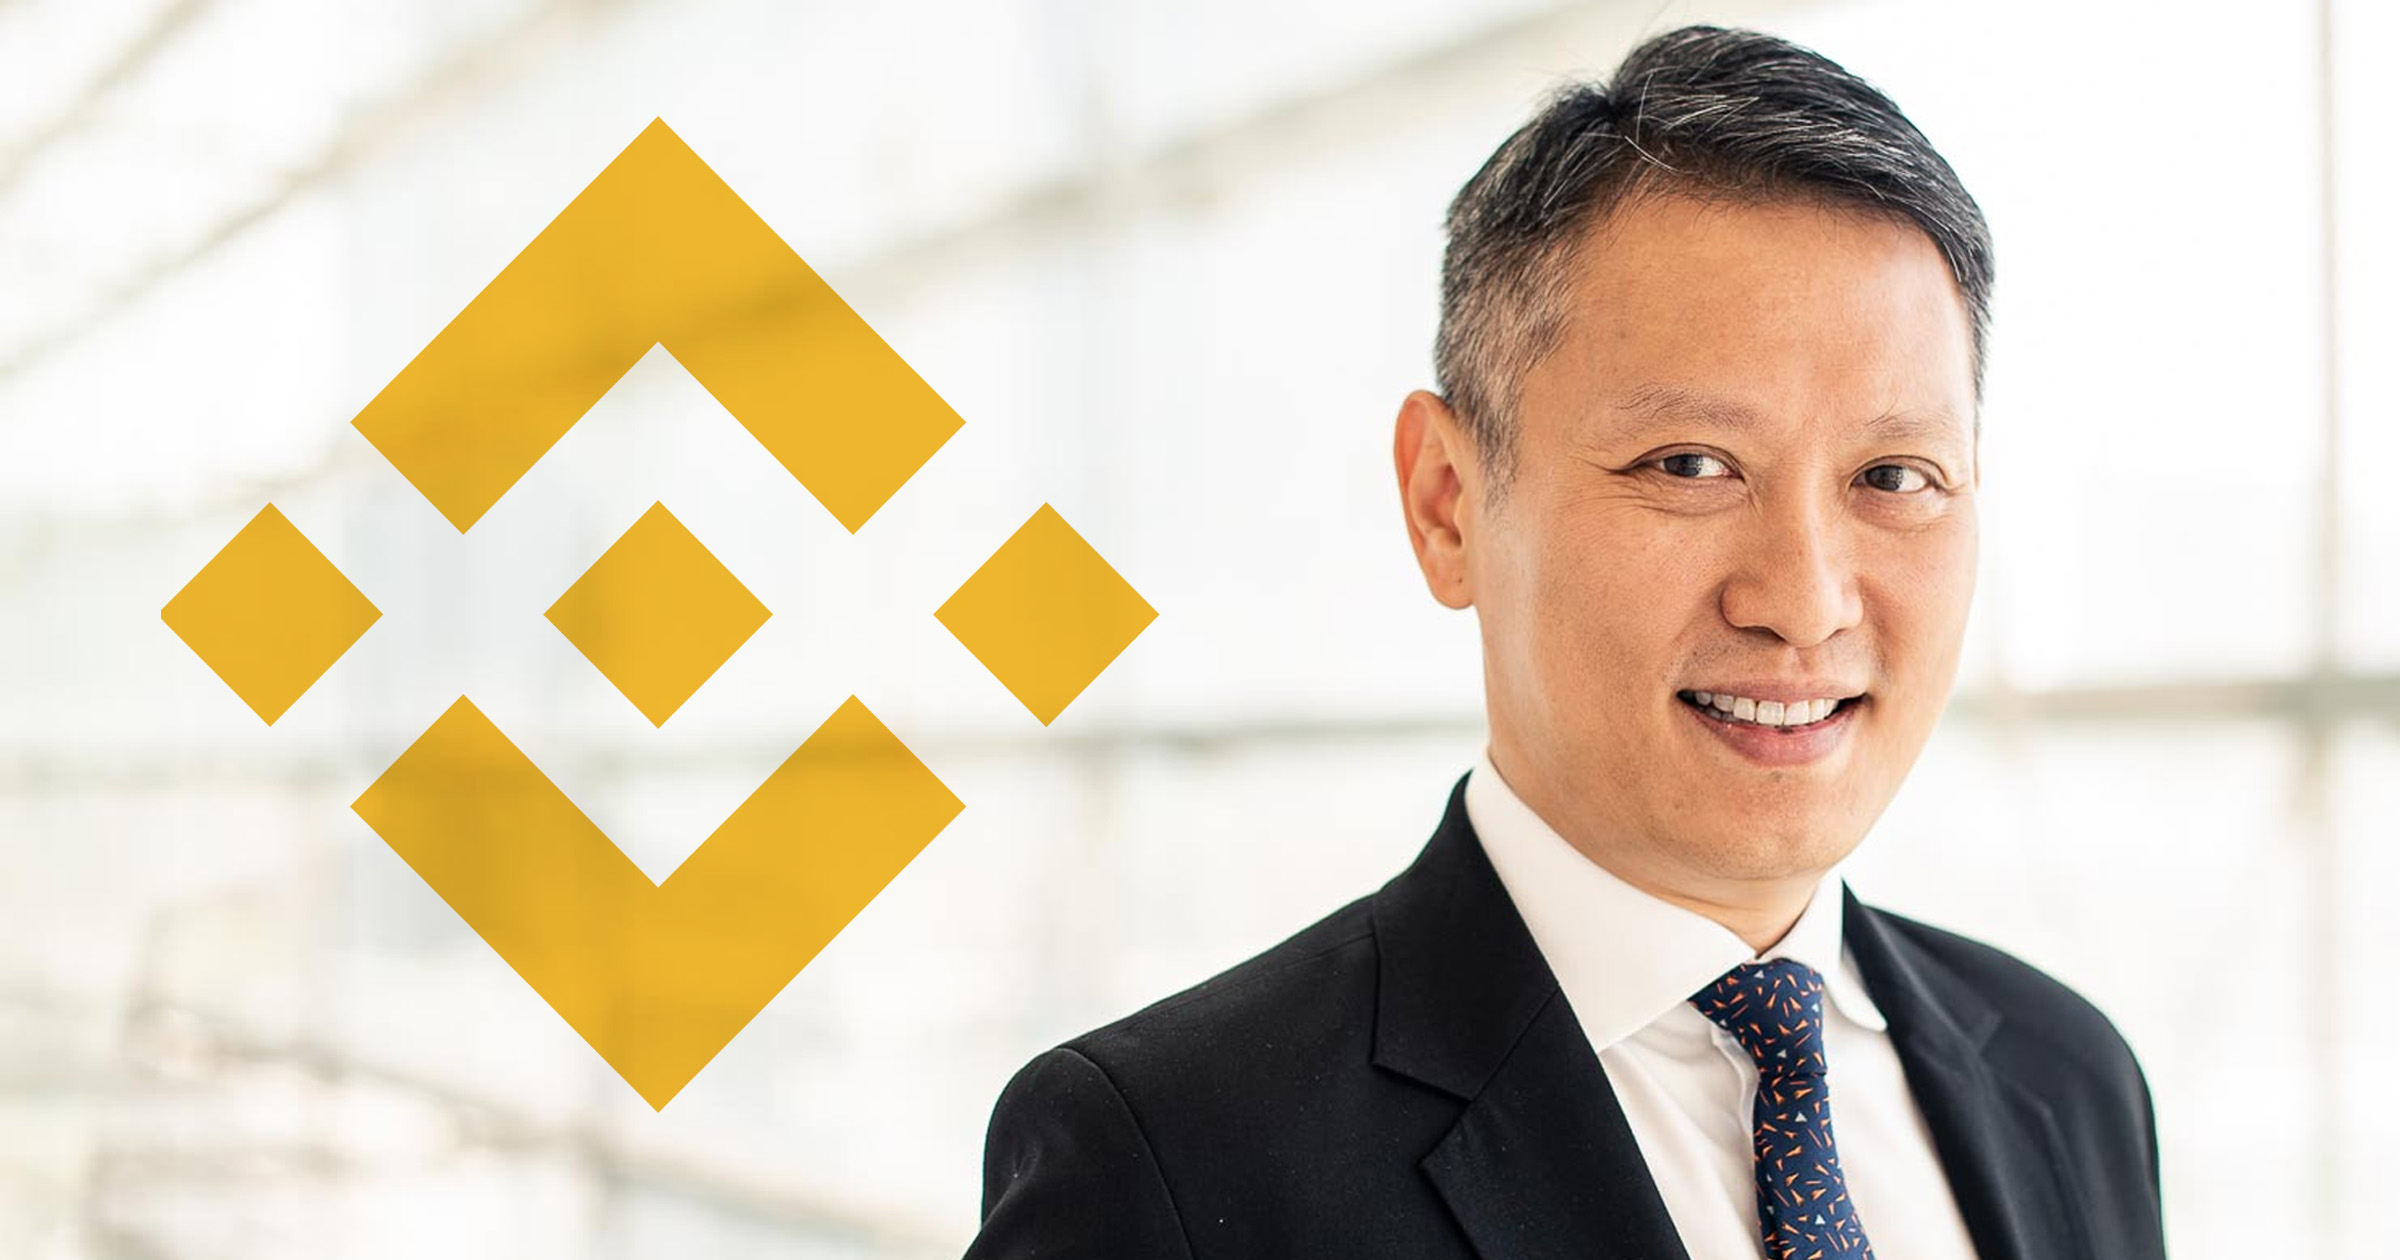 S’porean Richard Teng replaces CZ as Binance CEO in a US$4.3B settlement with US authorities